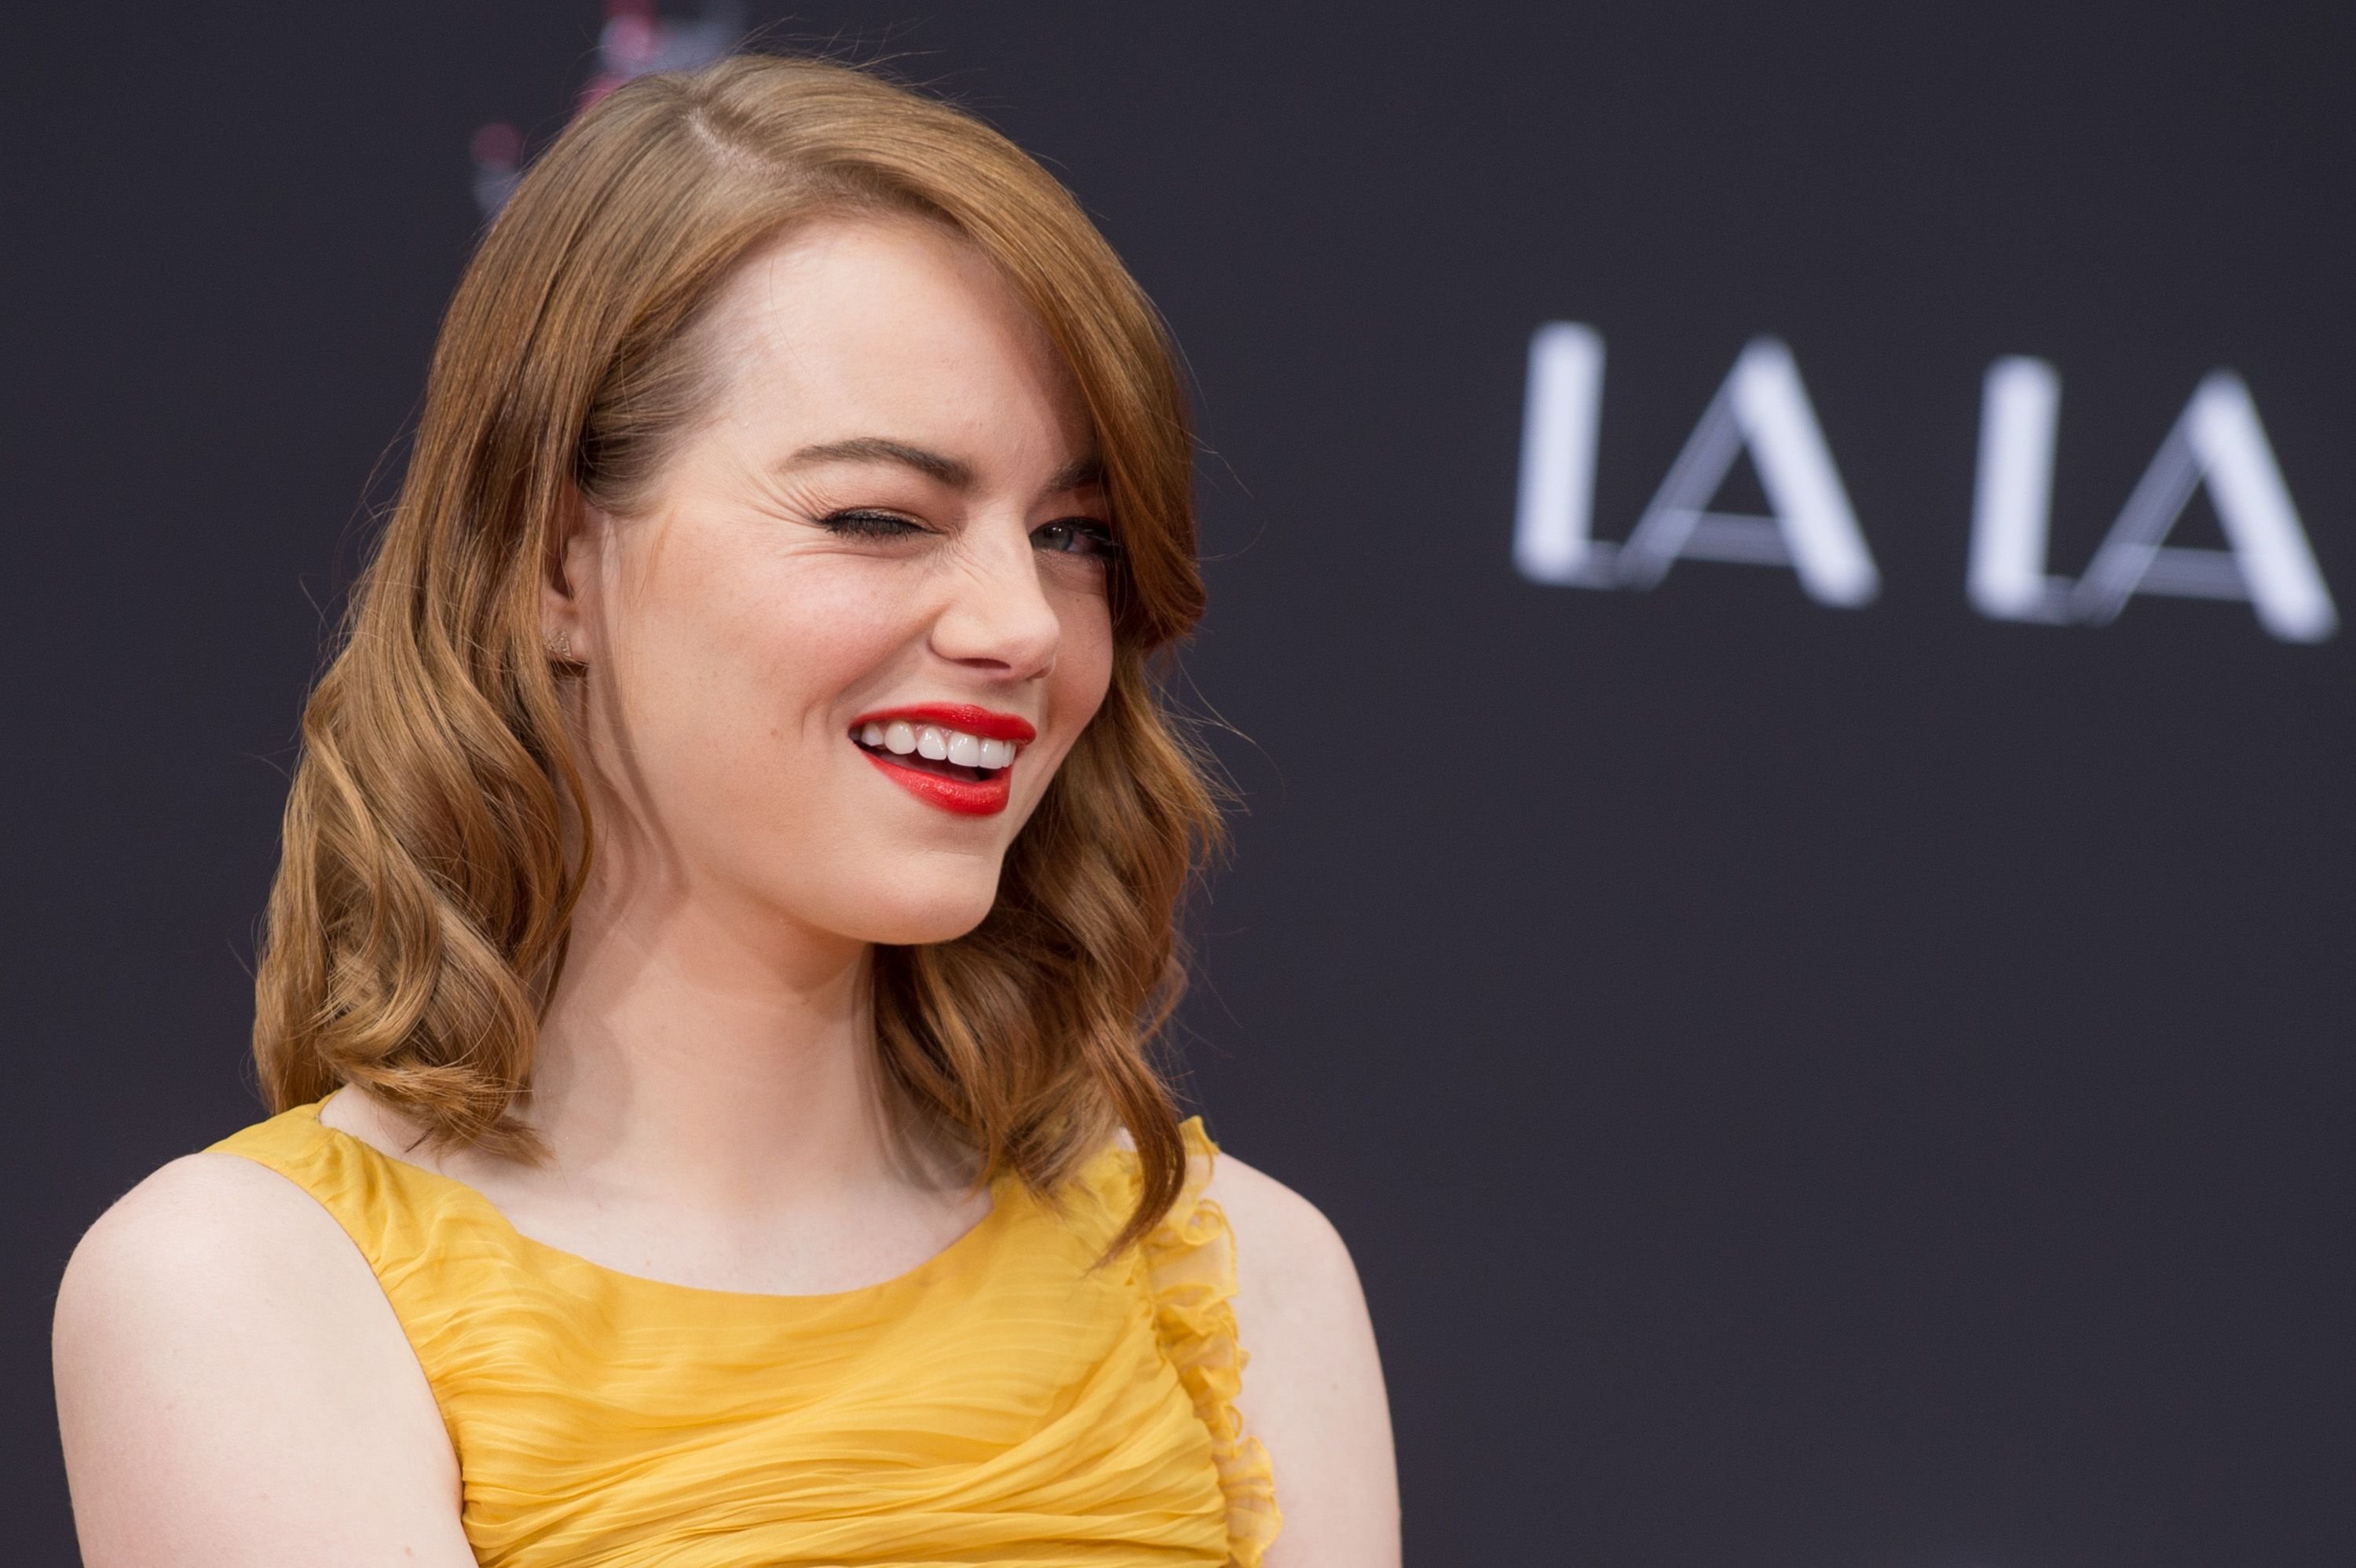 Emma Stone at 'Ryan Gosling and Emma Stone hand and footprint ceremony' at TCL Chinese Theatre IMAX on December 7, 2016 in Hollywood, California. | Photo: Getty Images